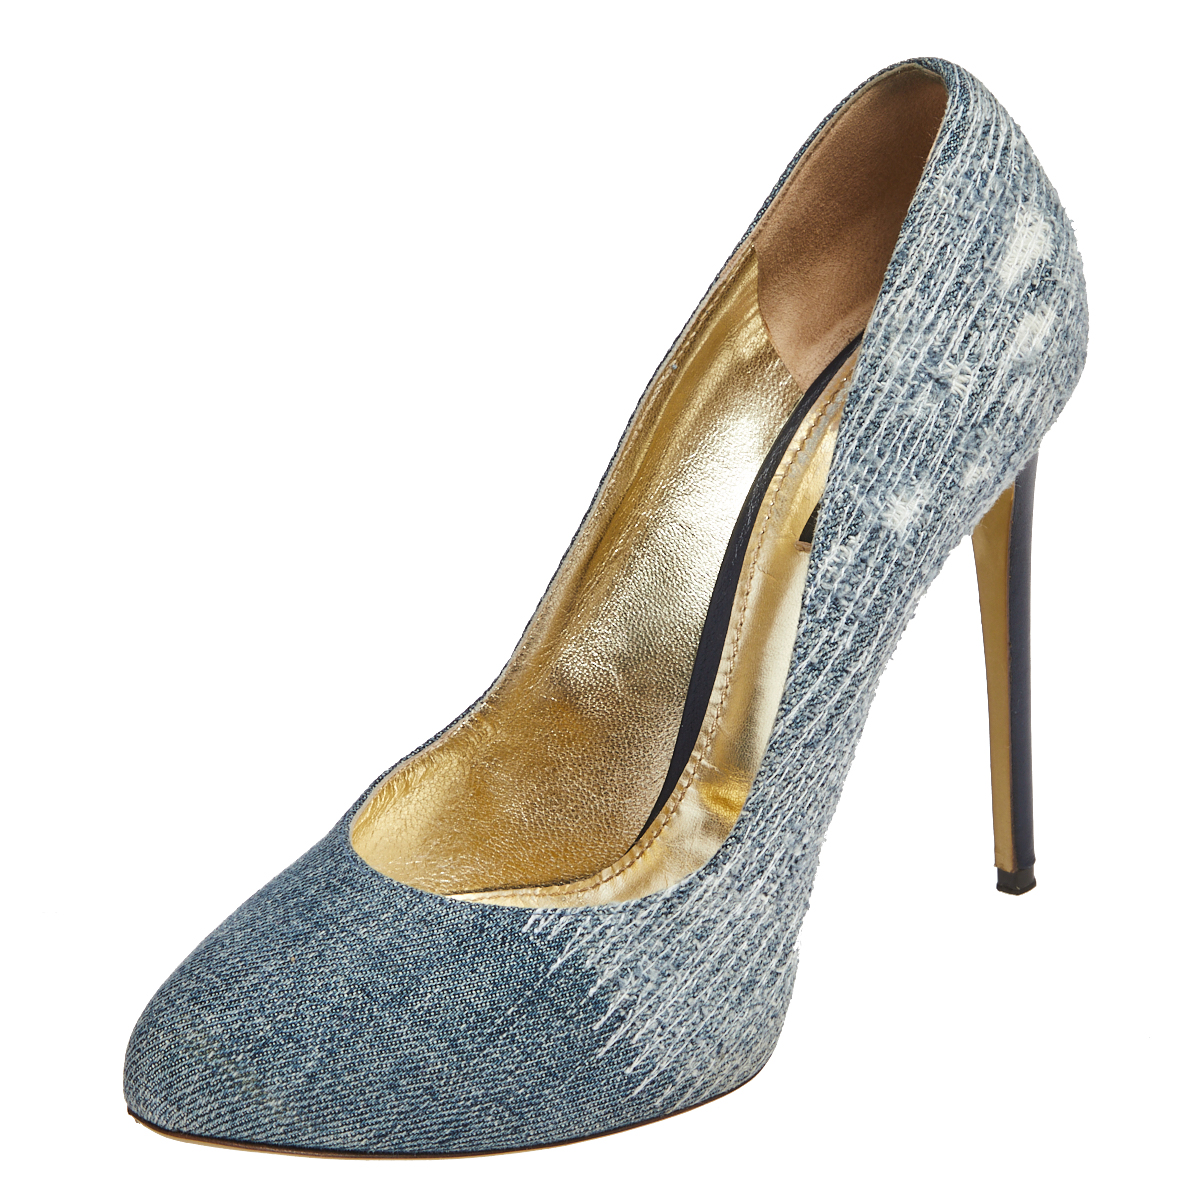 Crafted from denim these Dolce and Gabbana pumps will lend you appeal and comfort. They flaunt a round toe slip on silhouette and rest on a durable leather insole. The 13 cm stiletto heels elevate their overall charm.